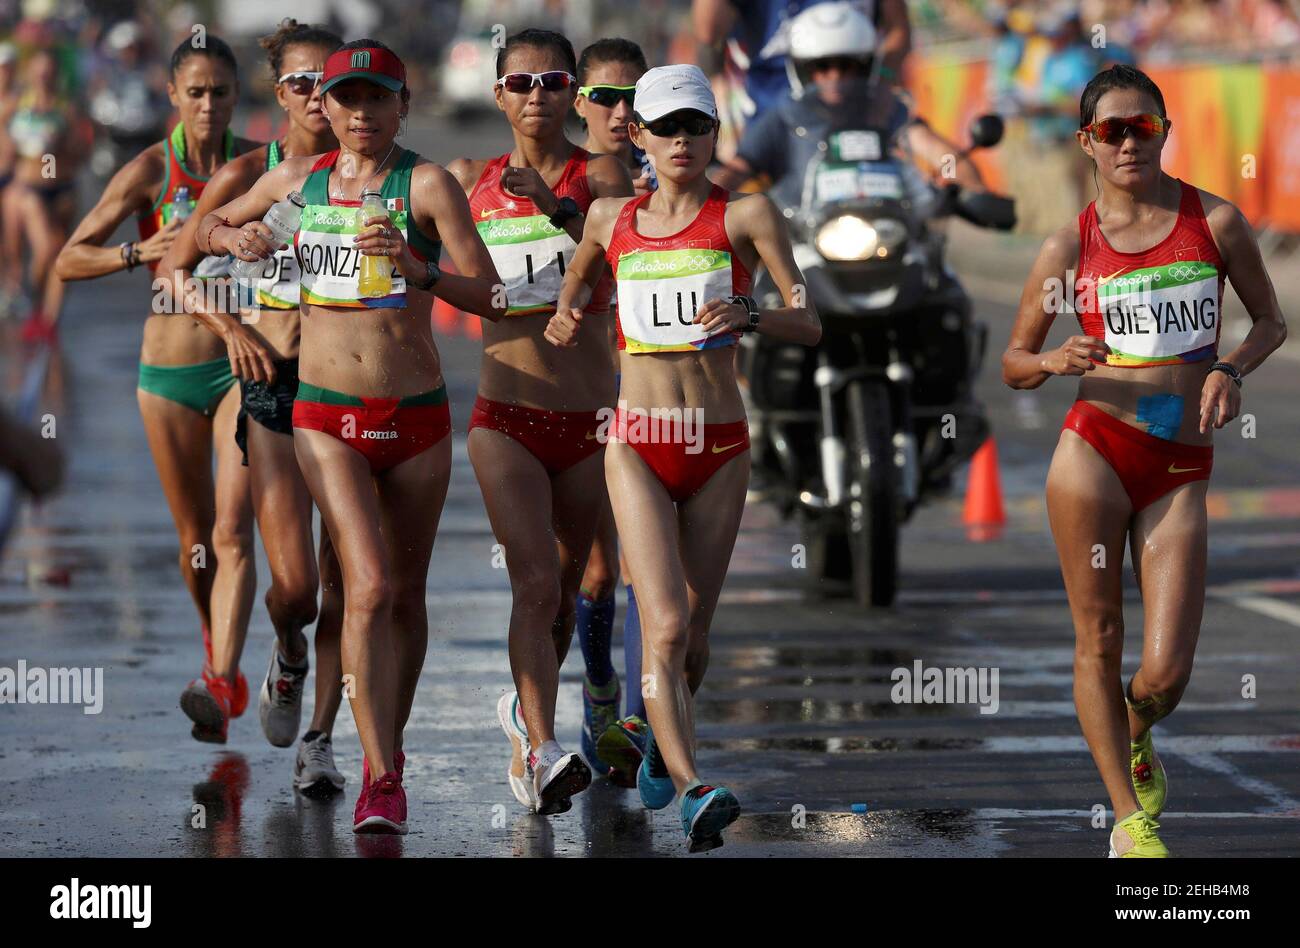 2016 Rio Olympics - Athletics - Final - Women's 20km Race Walk - Pontal - Rio de Janeiro, Brazil - 19/08/2016. Lu Xiuzhi (CHN) of China, Qieyang Shenjie (CHN) of China and Liu Hong (CHN) of China compete.      REUTERS/Damir Sagolj  FOR EDITORIAL USE ONLY. NOT FOR SALE FOR MARKETING OR ADVERTISING CAMPAIGNS.     Picture Supplied by Action Images Stock Photo